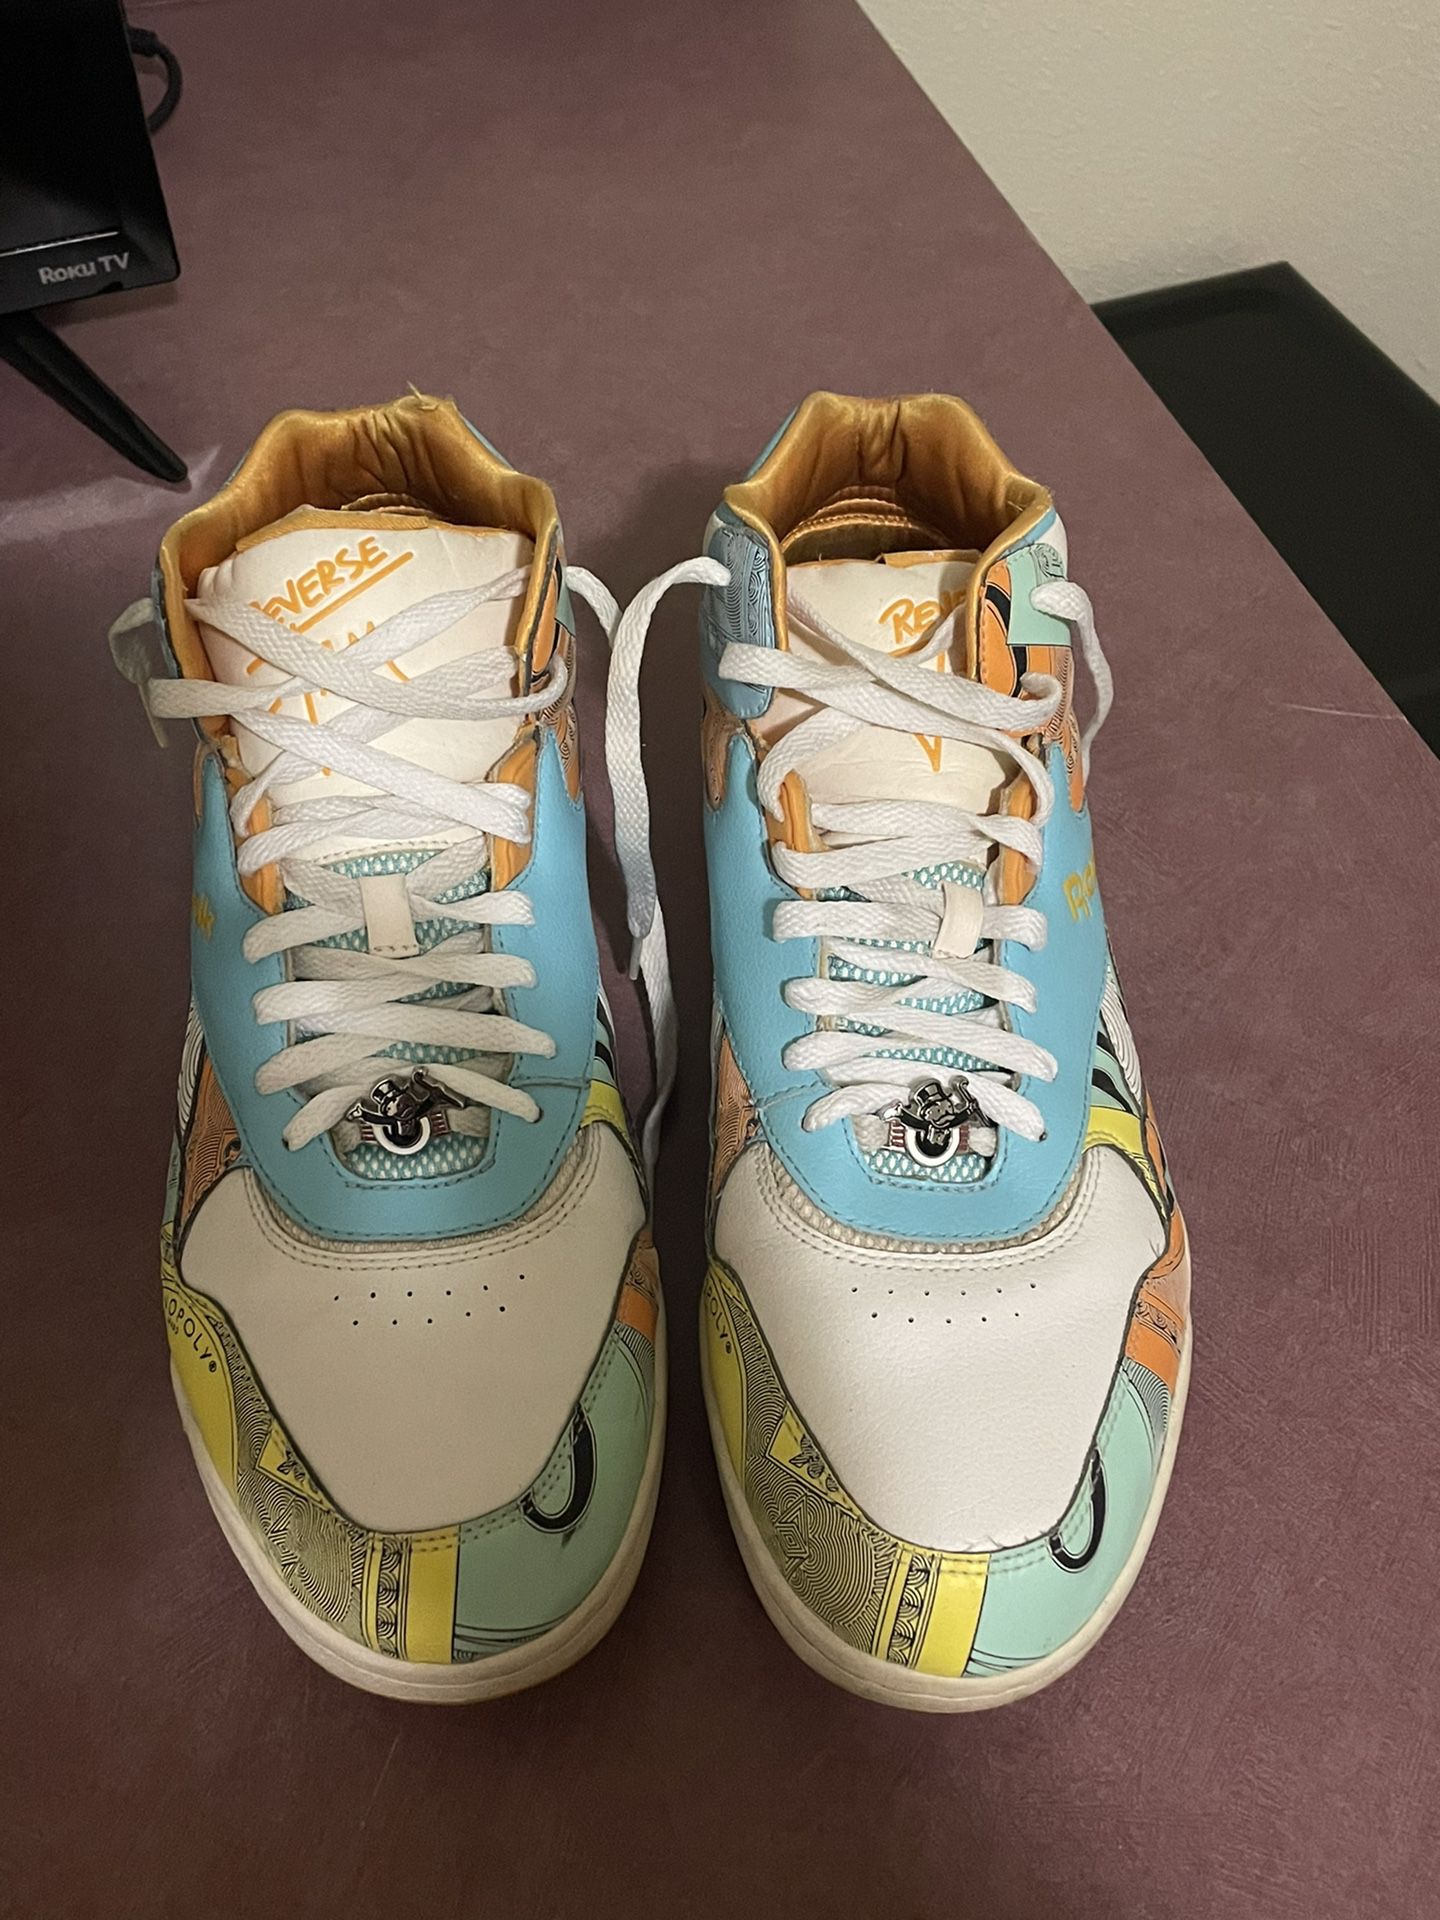 Reebok Reverse Jams Monopoly Collab for Sale Silver Spring, - OfferUp